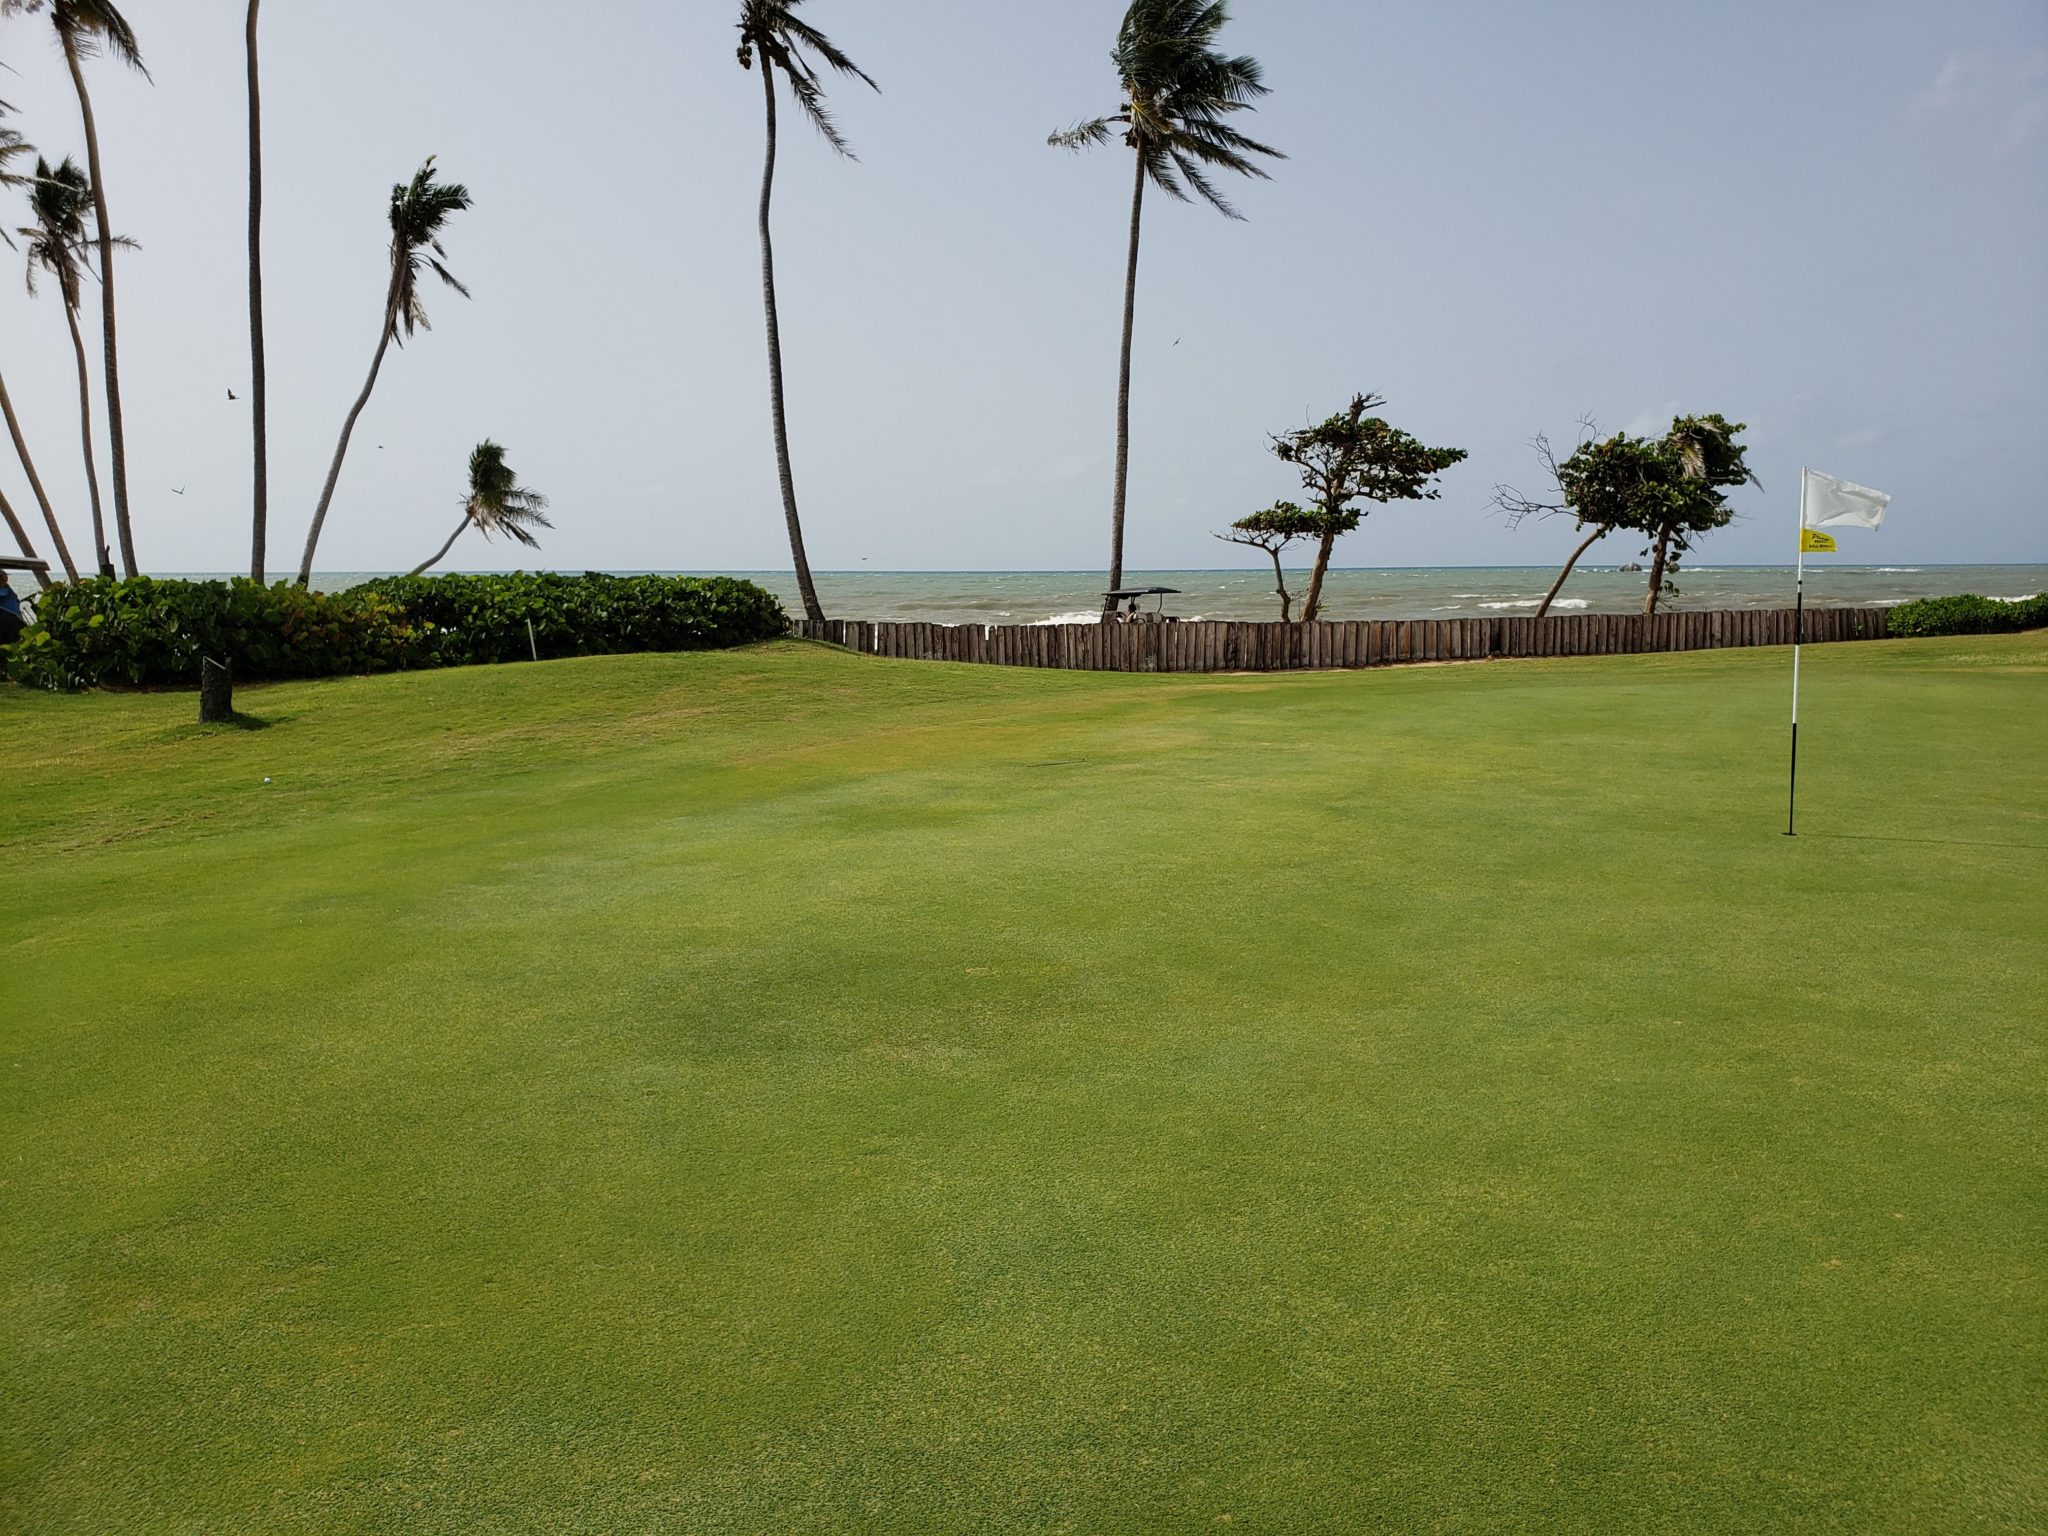 a golf course with palm trees and a fence